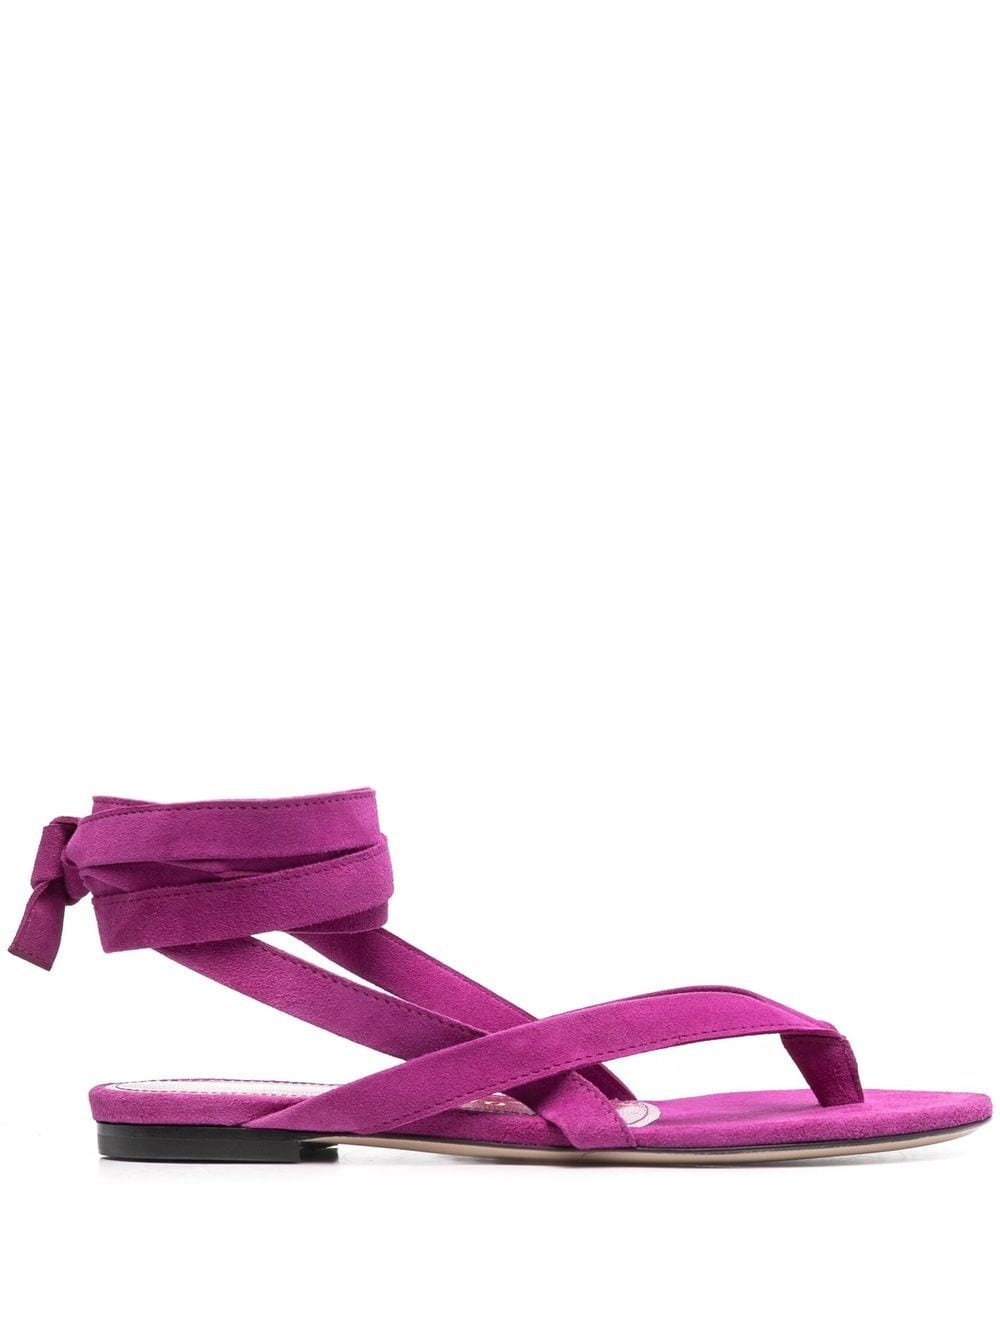 ankle-strap flat sandals